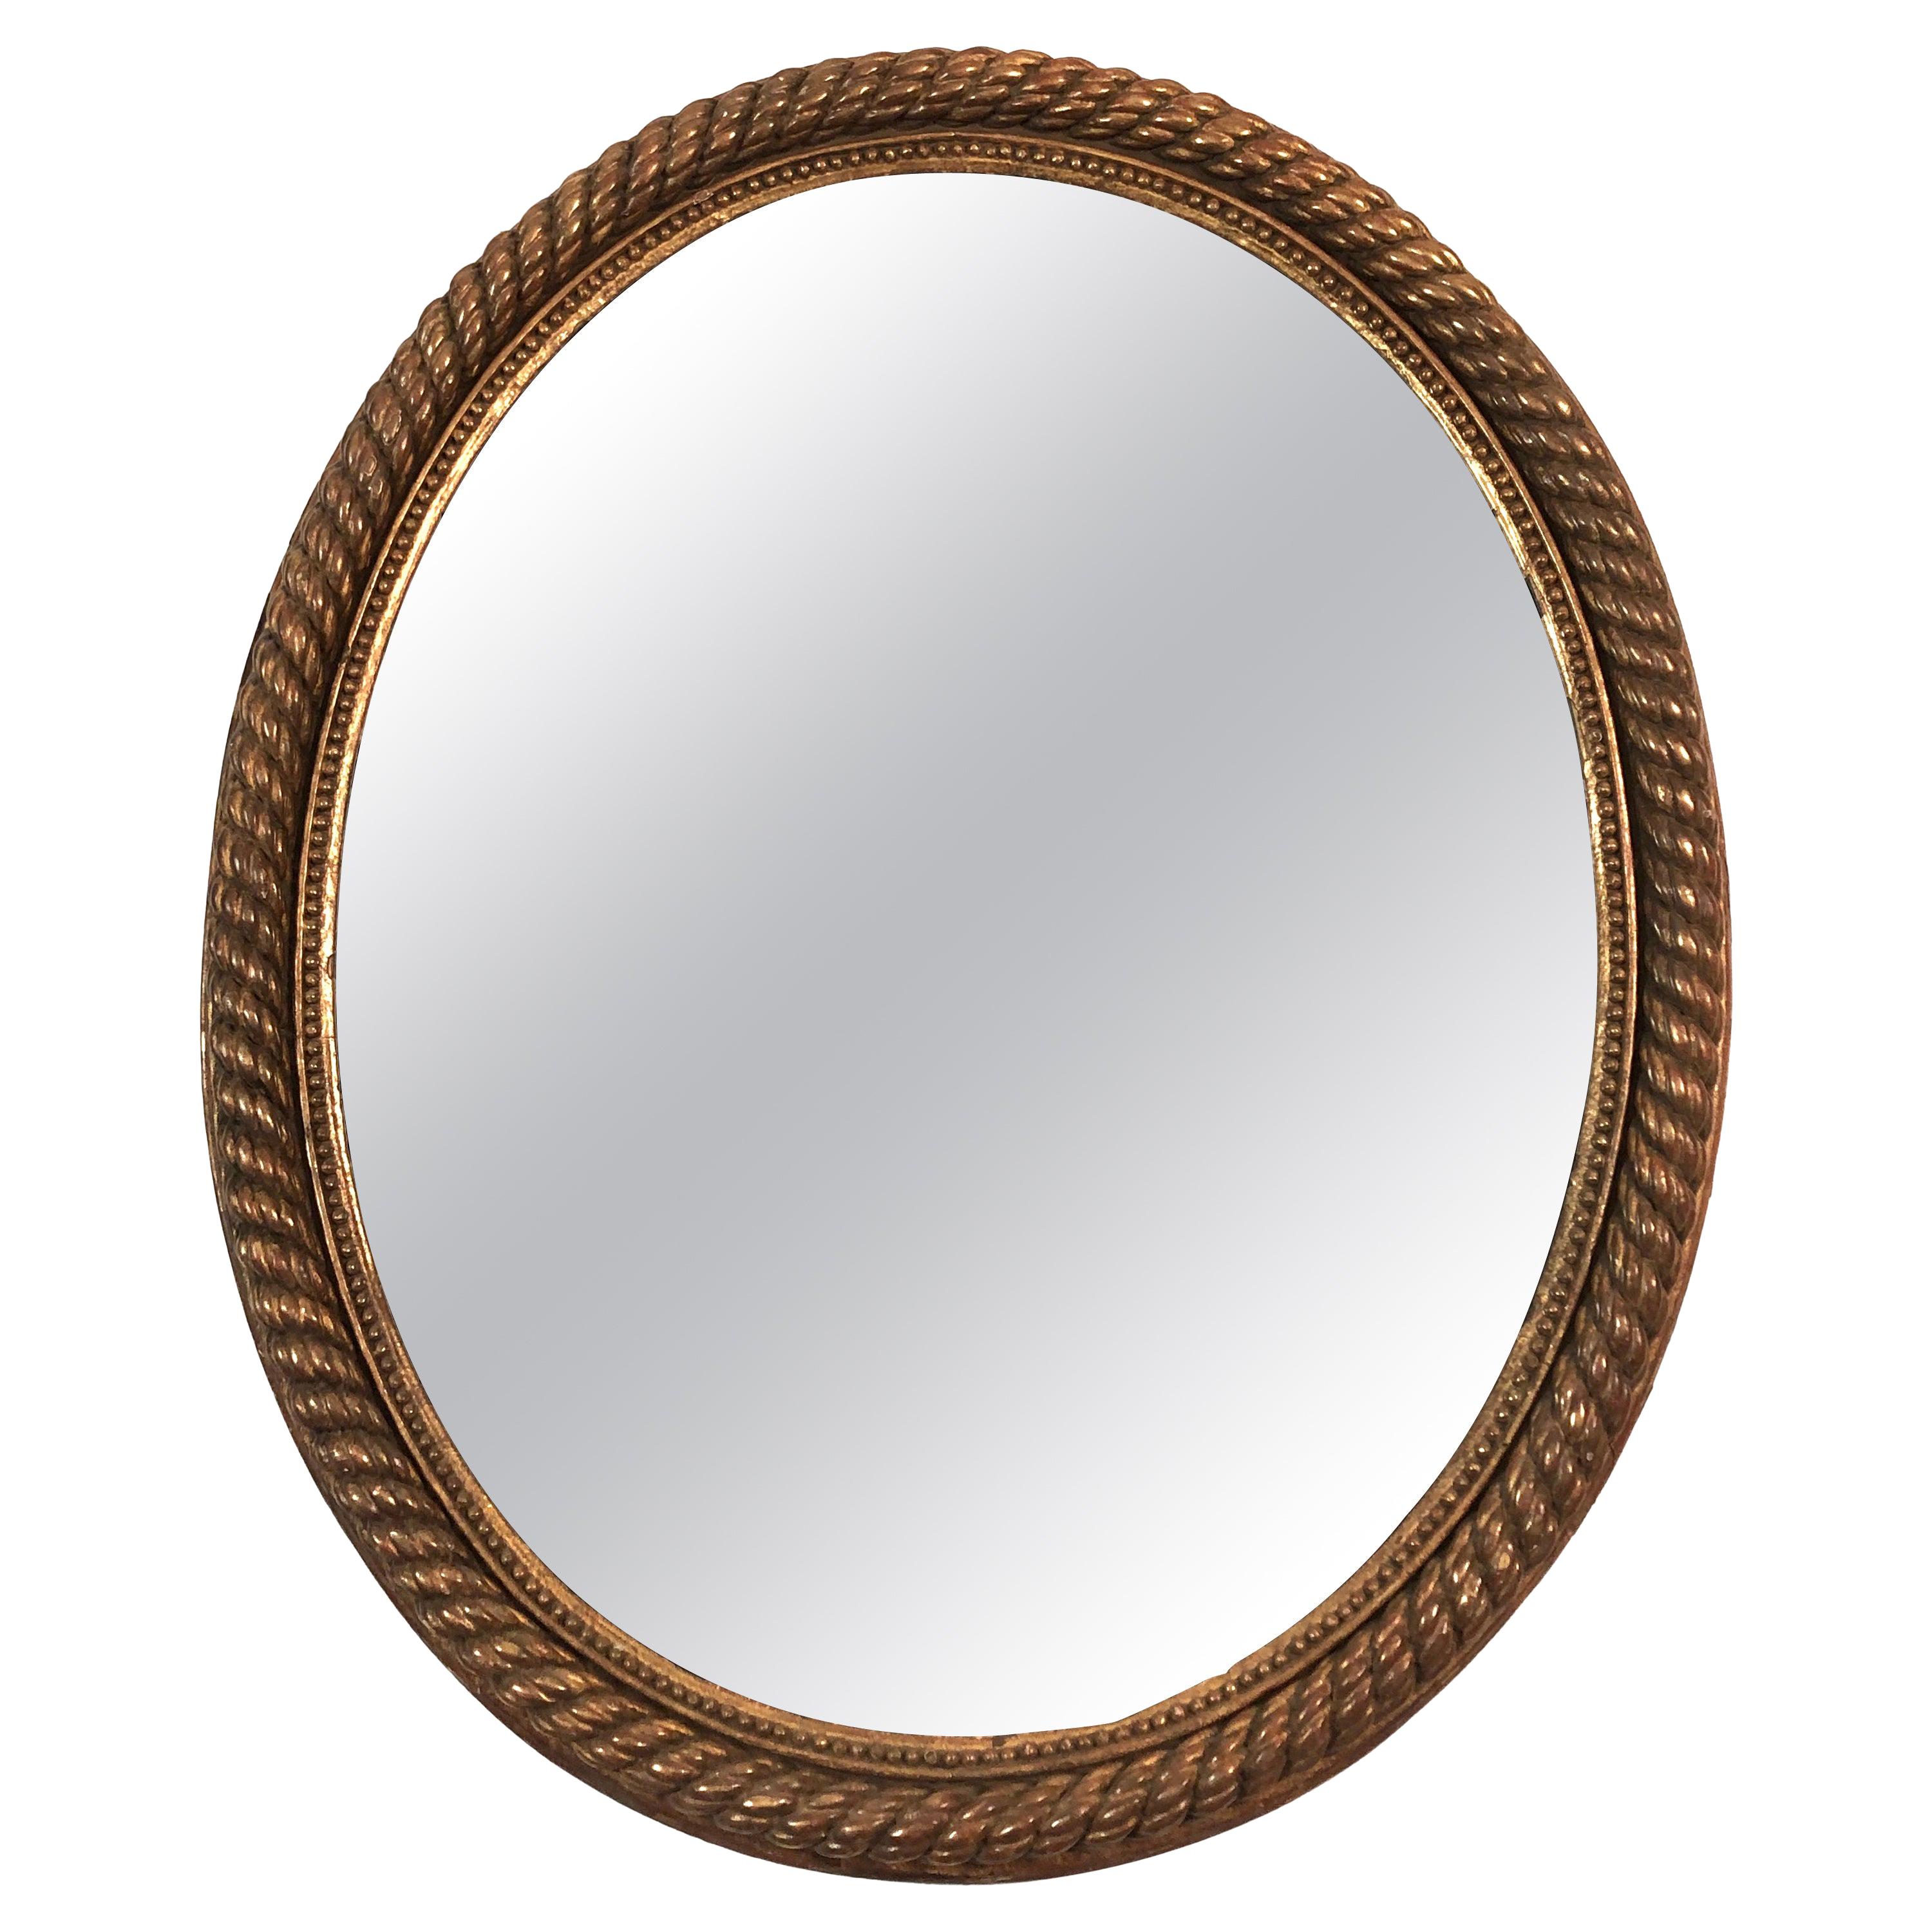 19th Century French Giltwood Oval Rope Twist Mirror